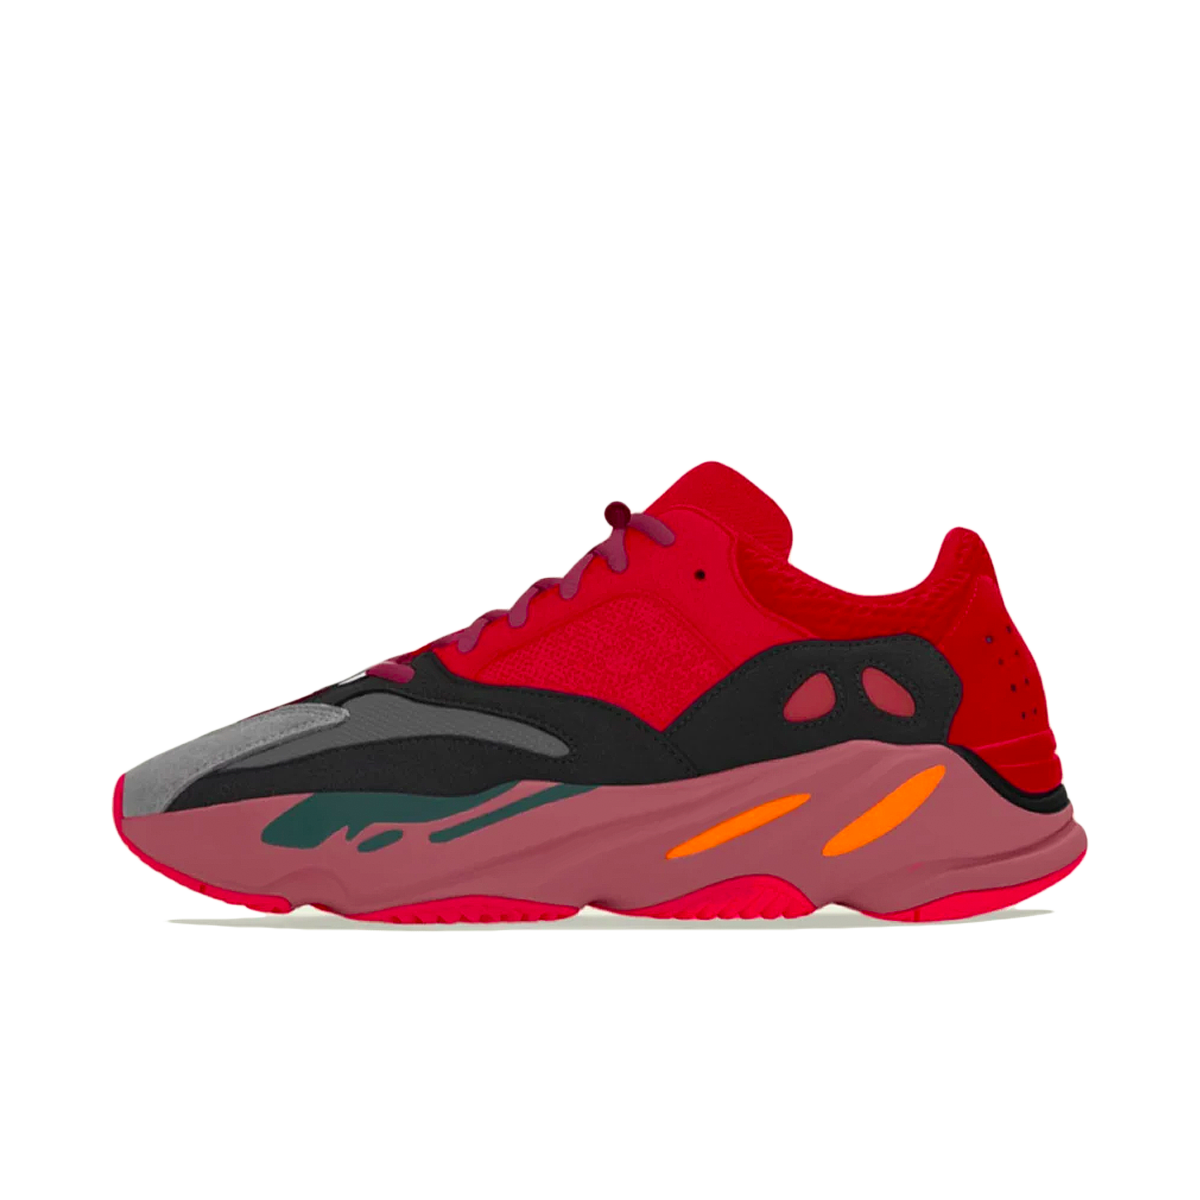 adidas Yeezy Boost 700 'Hi-Res Red' HQ6979